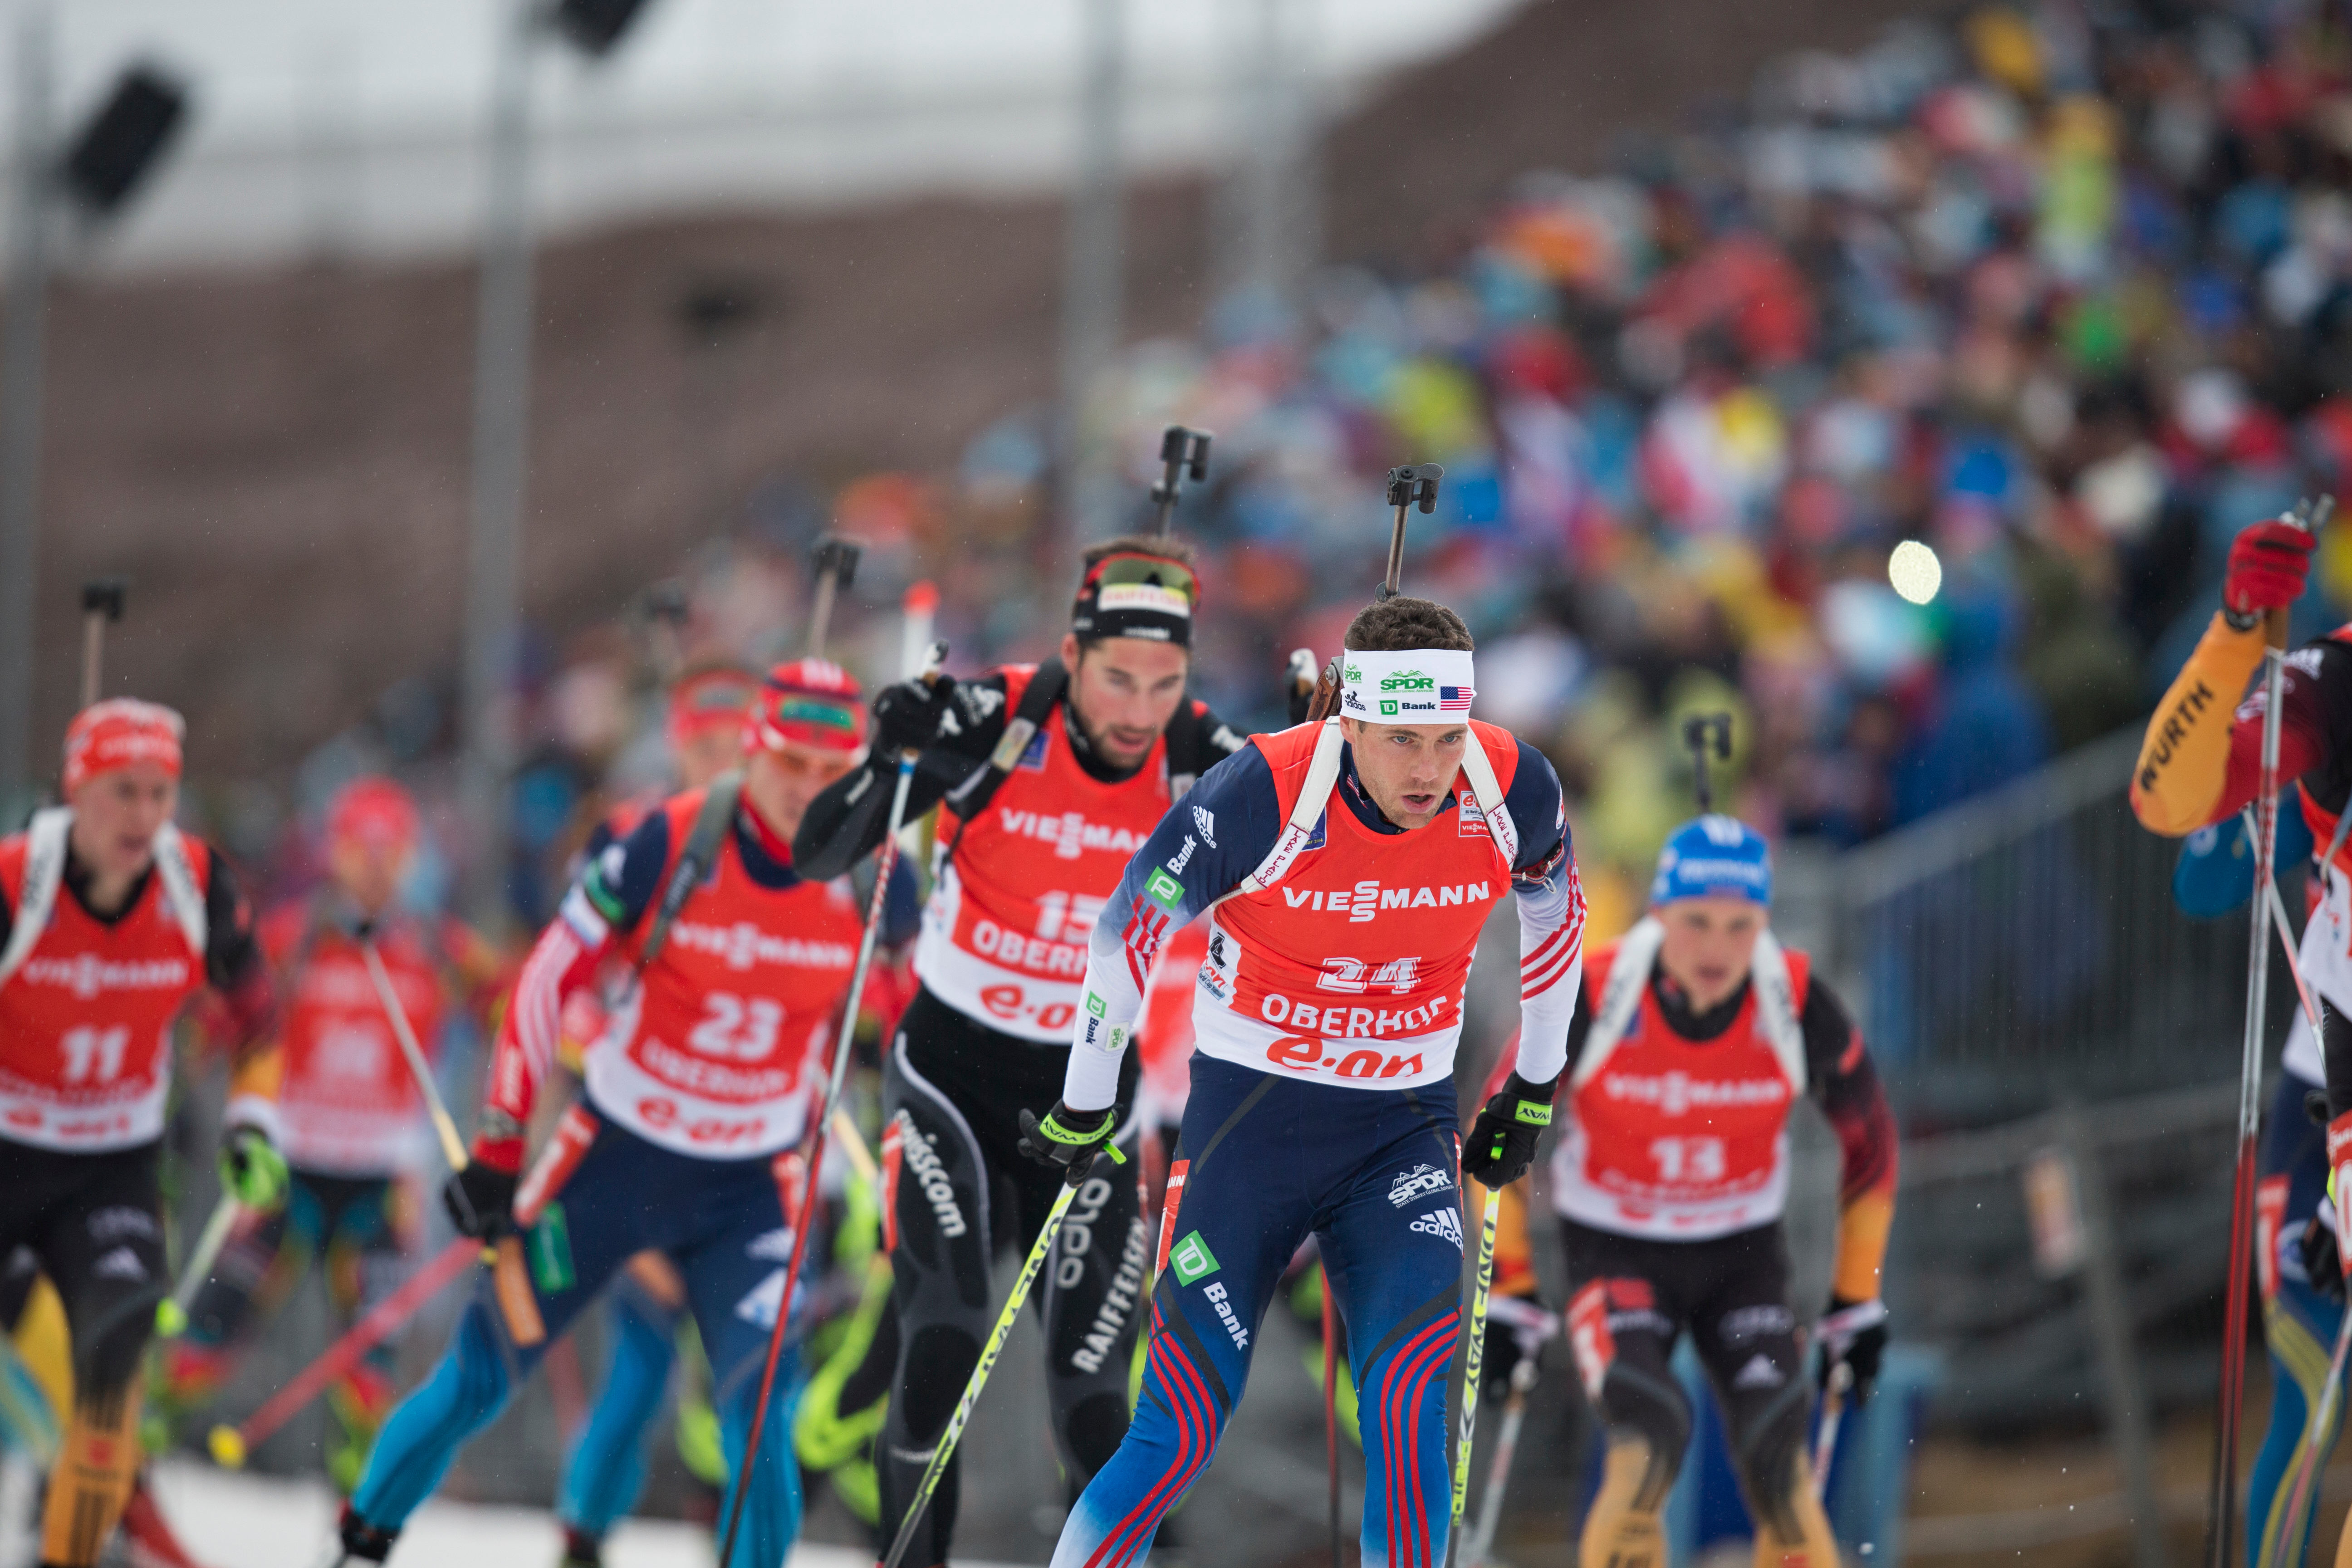 Tim Burke in the thick of things in the Oberhof mass start. Photo: USBA/NordicFocus.com.